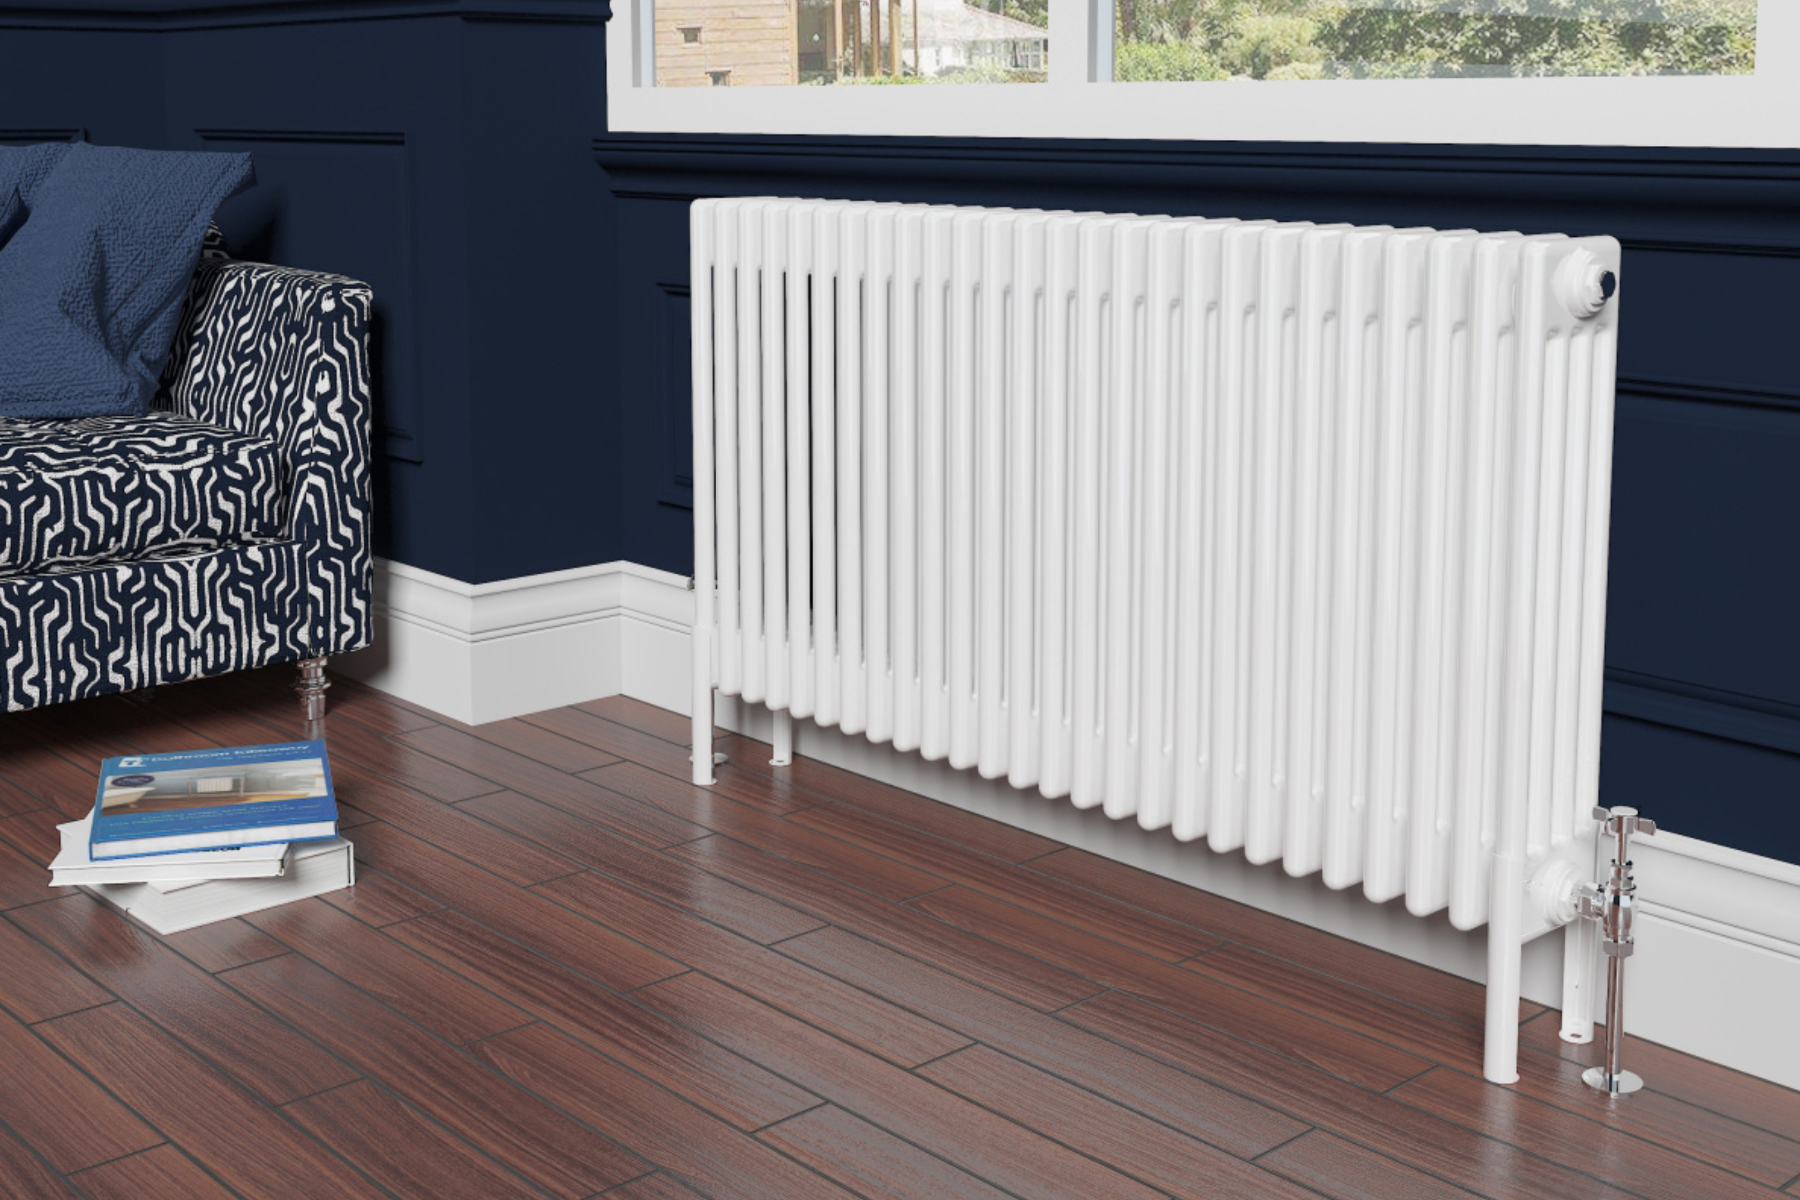 White Radiator In Lounge Setting Against Navy Blue Wall